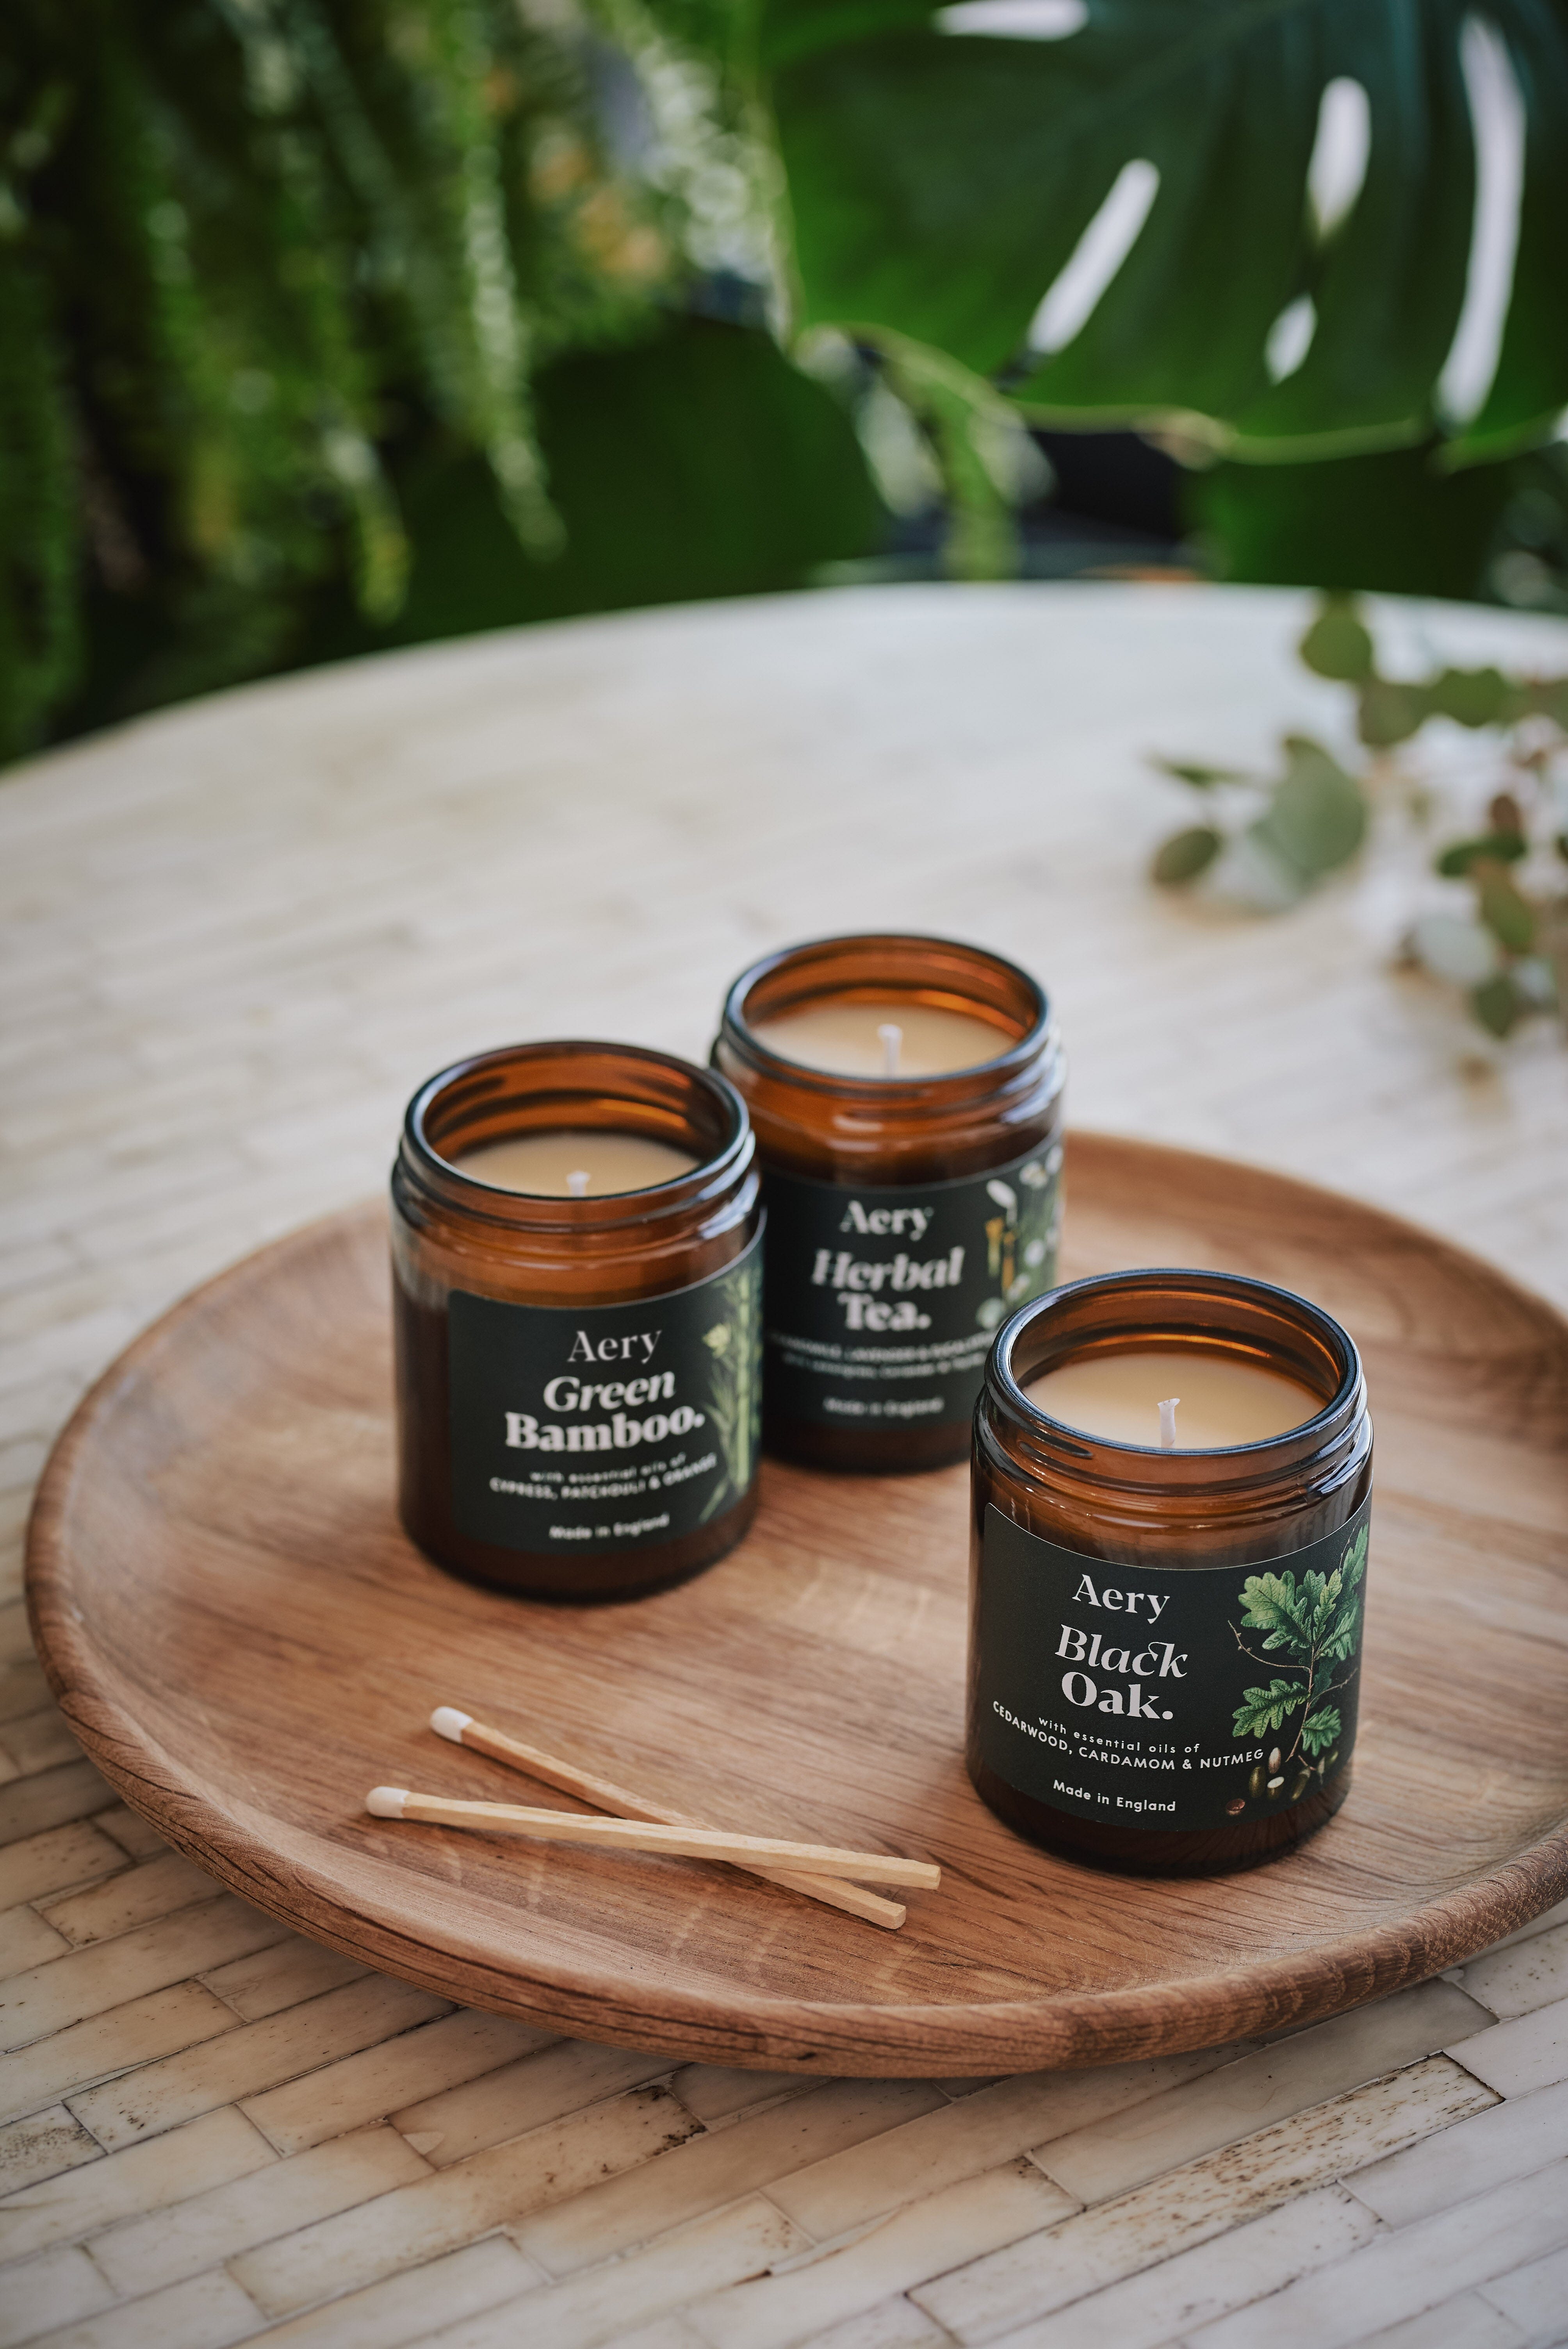 Green Botanical collection of three jar candles by Aery displayed on wooden circle tray with match sticks 